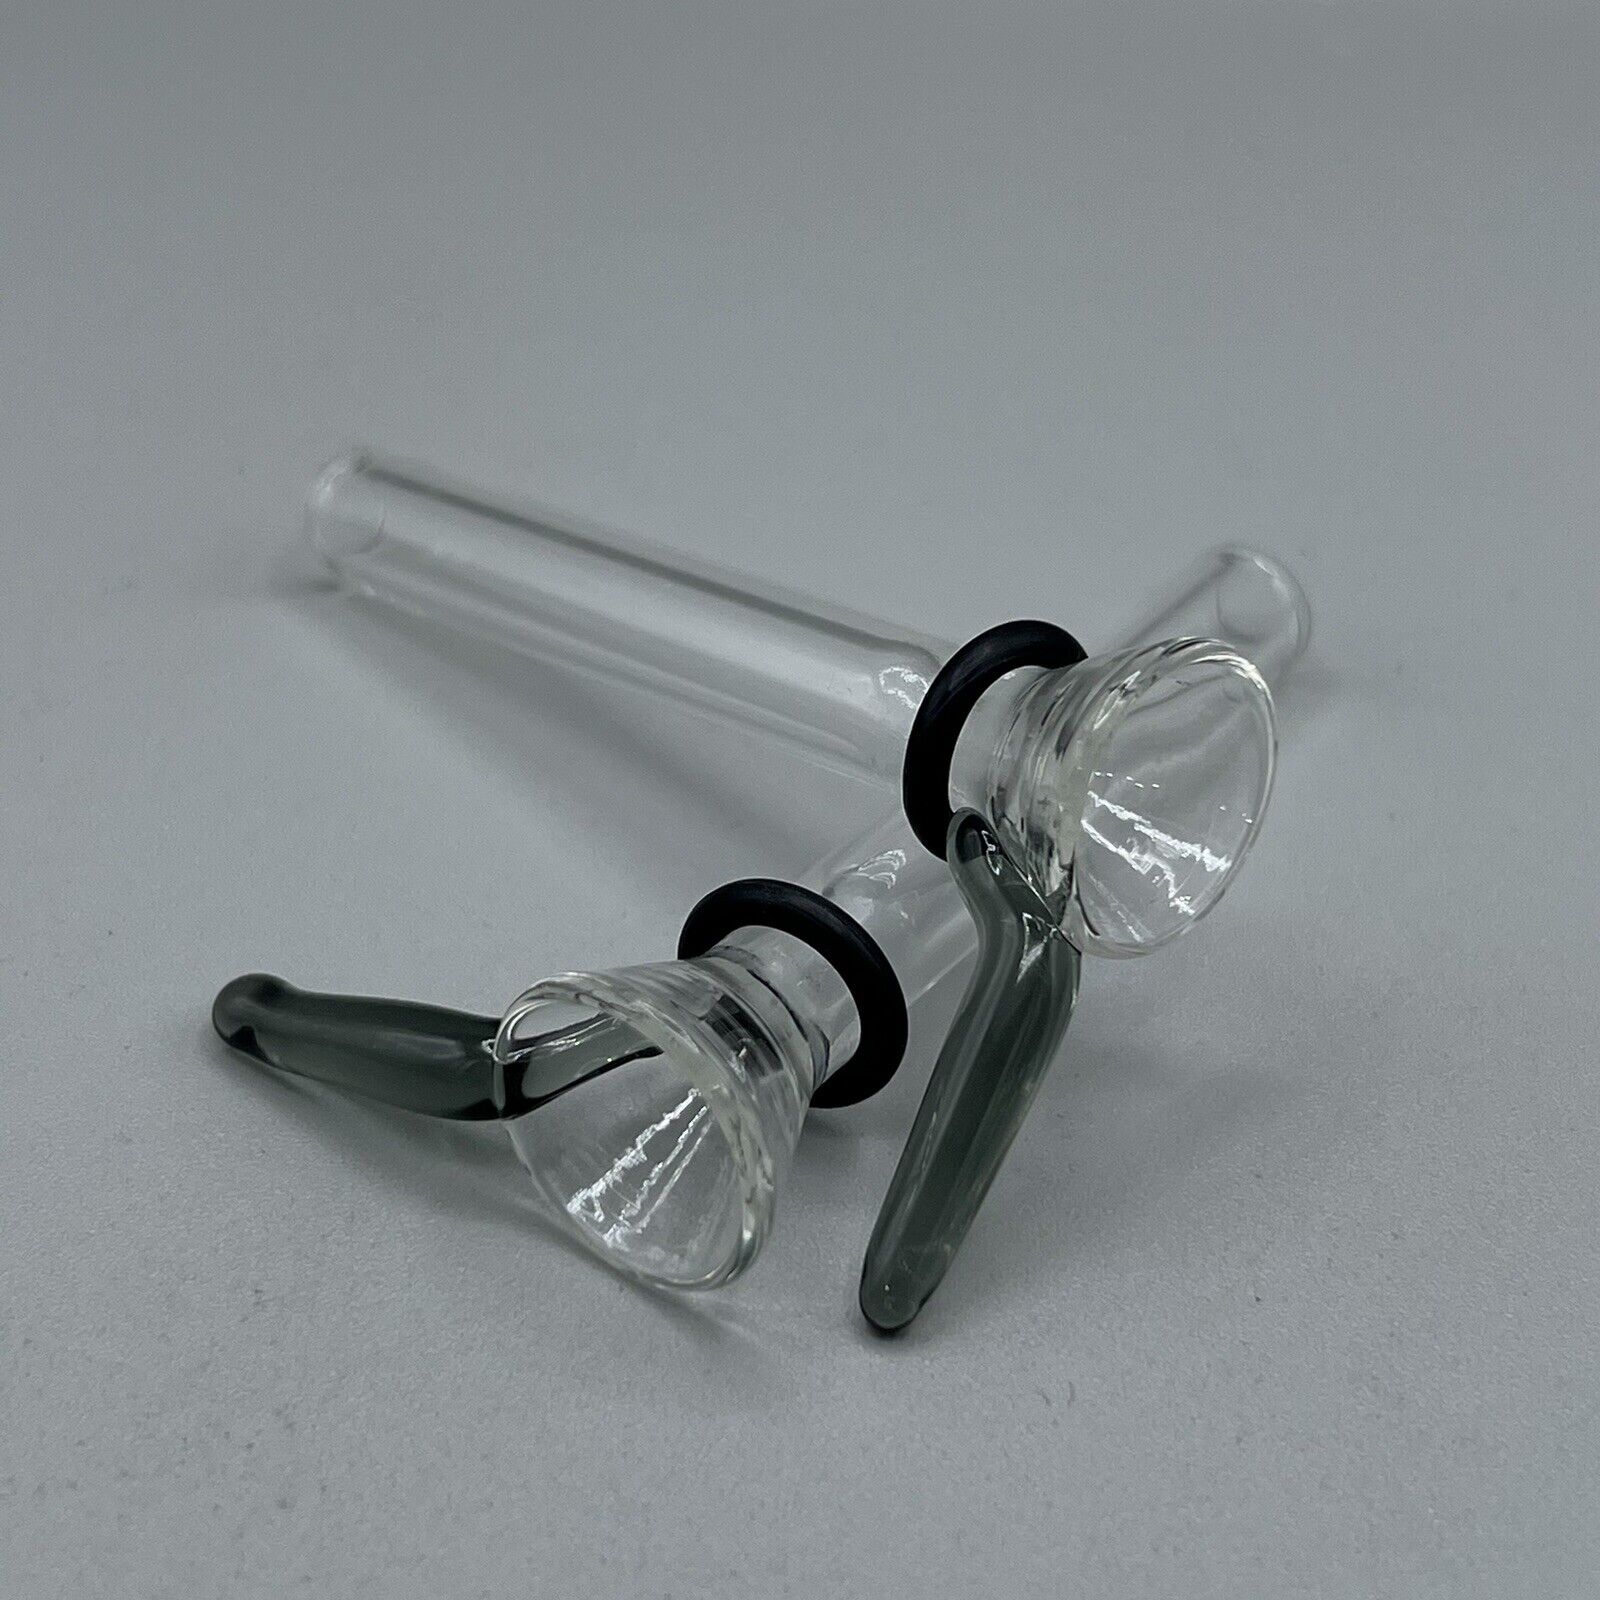 2.5 Glass Water Pipe Bong Slider Downstem TOBACCO Bowl HOOKAH 2 Piece/GREY. Available Now for 14.00